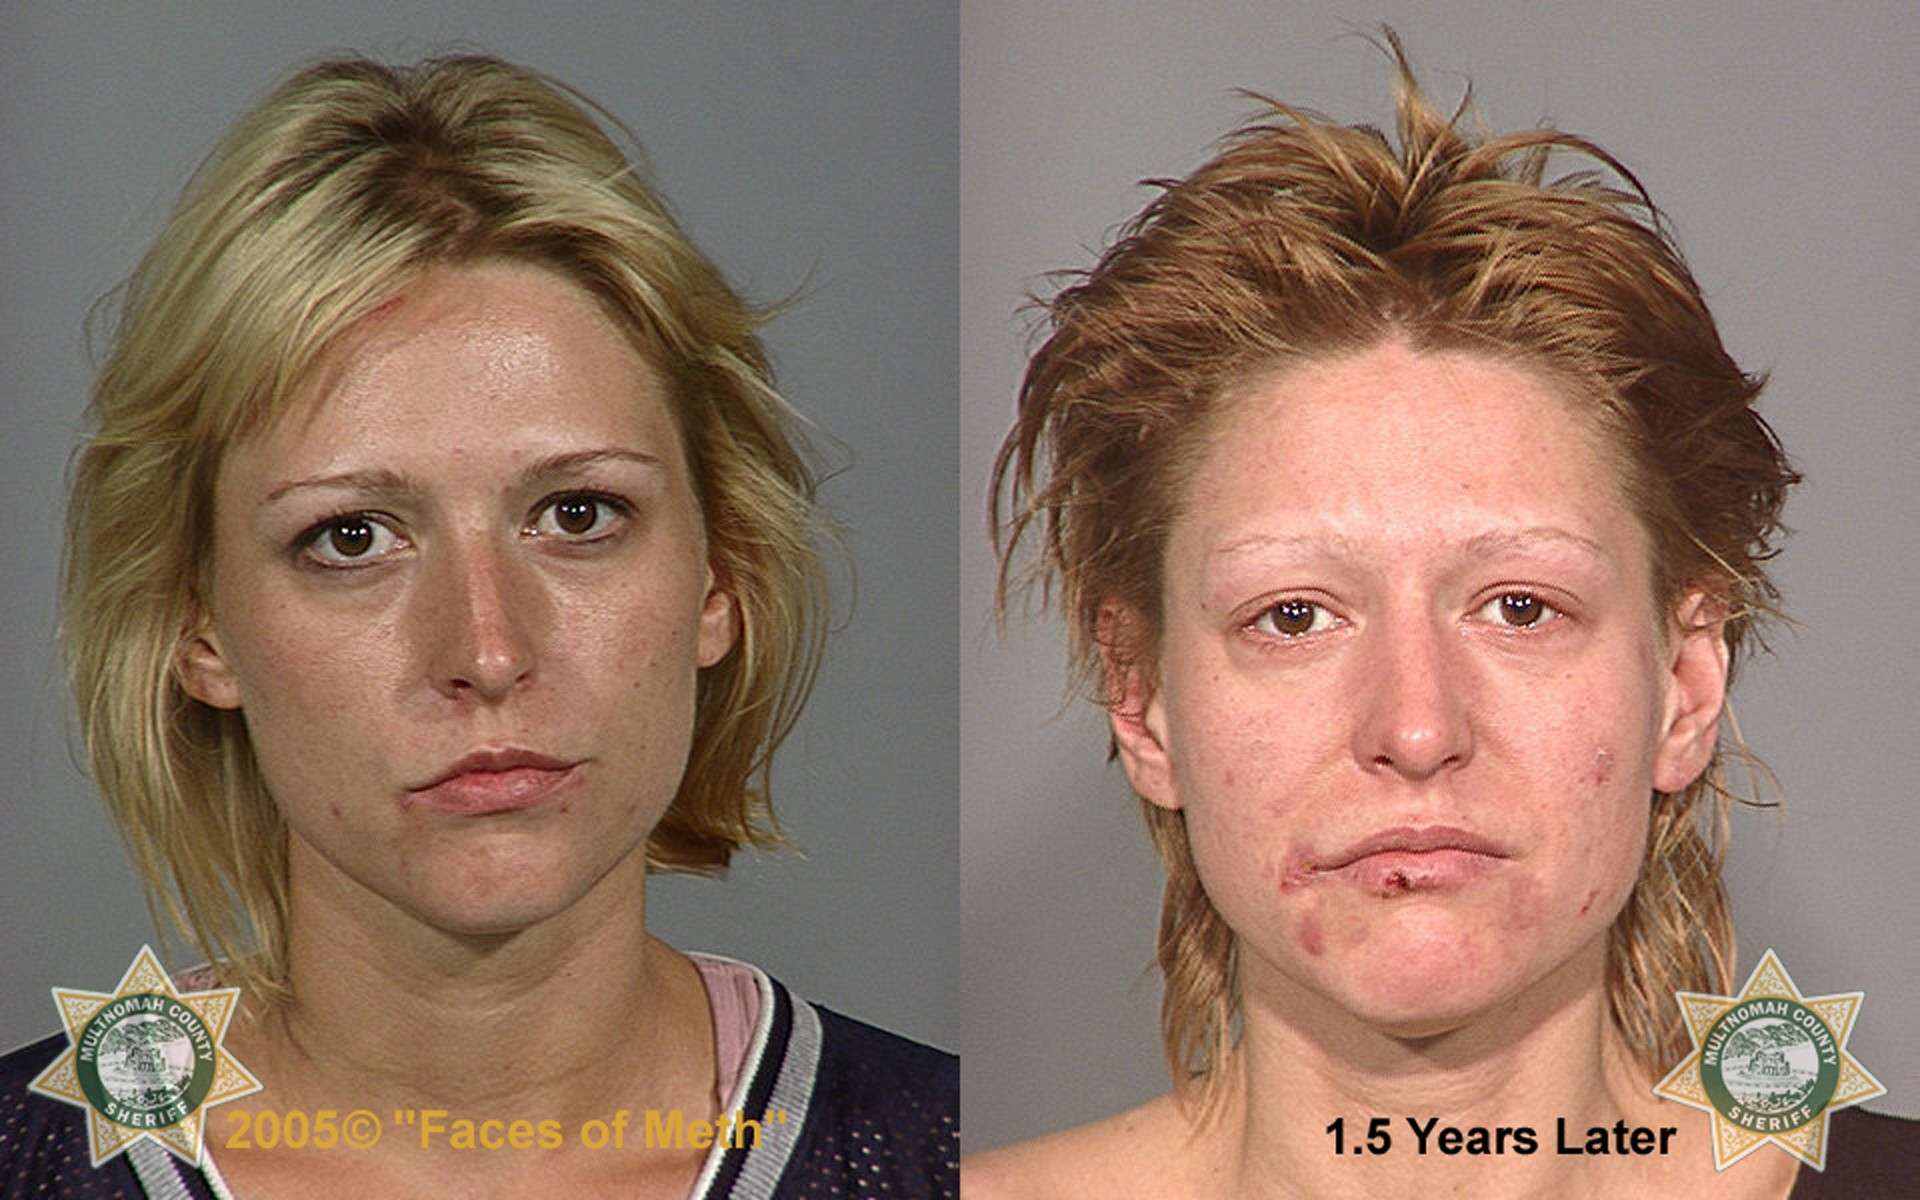 Faces of Meth Female. Photograph published with thanks to the Multnomah County Sheriff's Office. Copyright Faces of Meth ® 2005